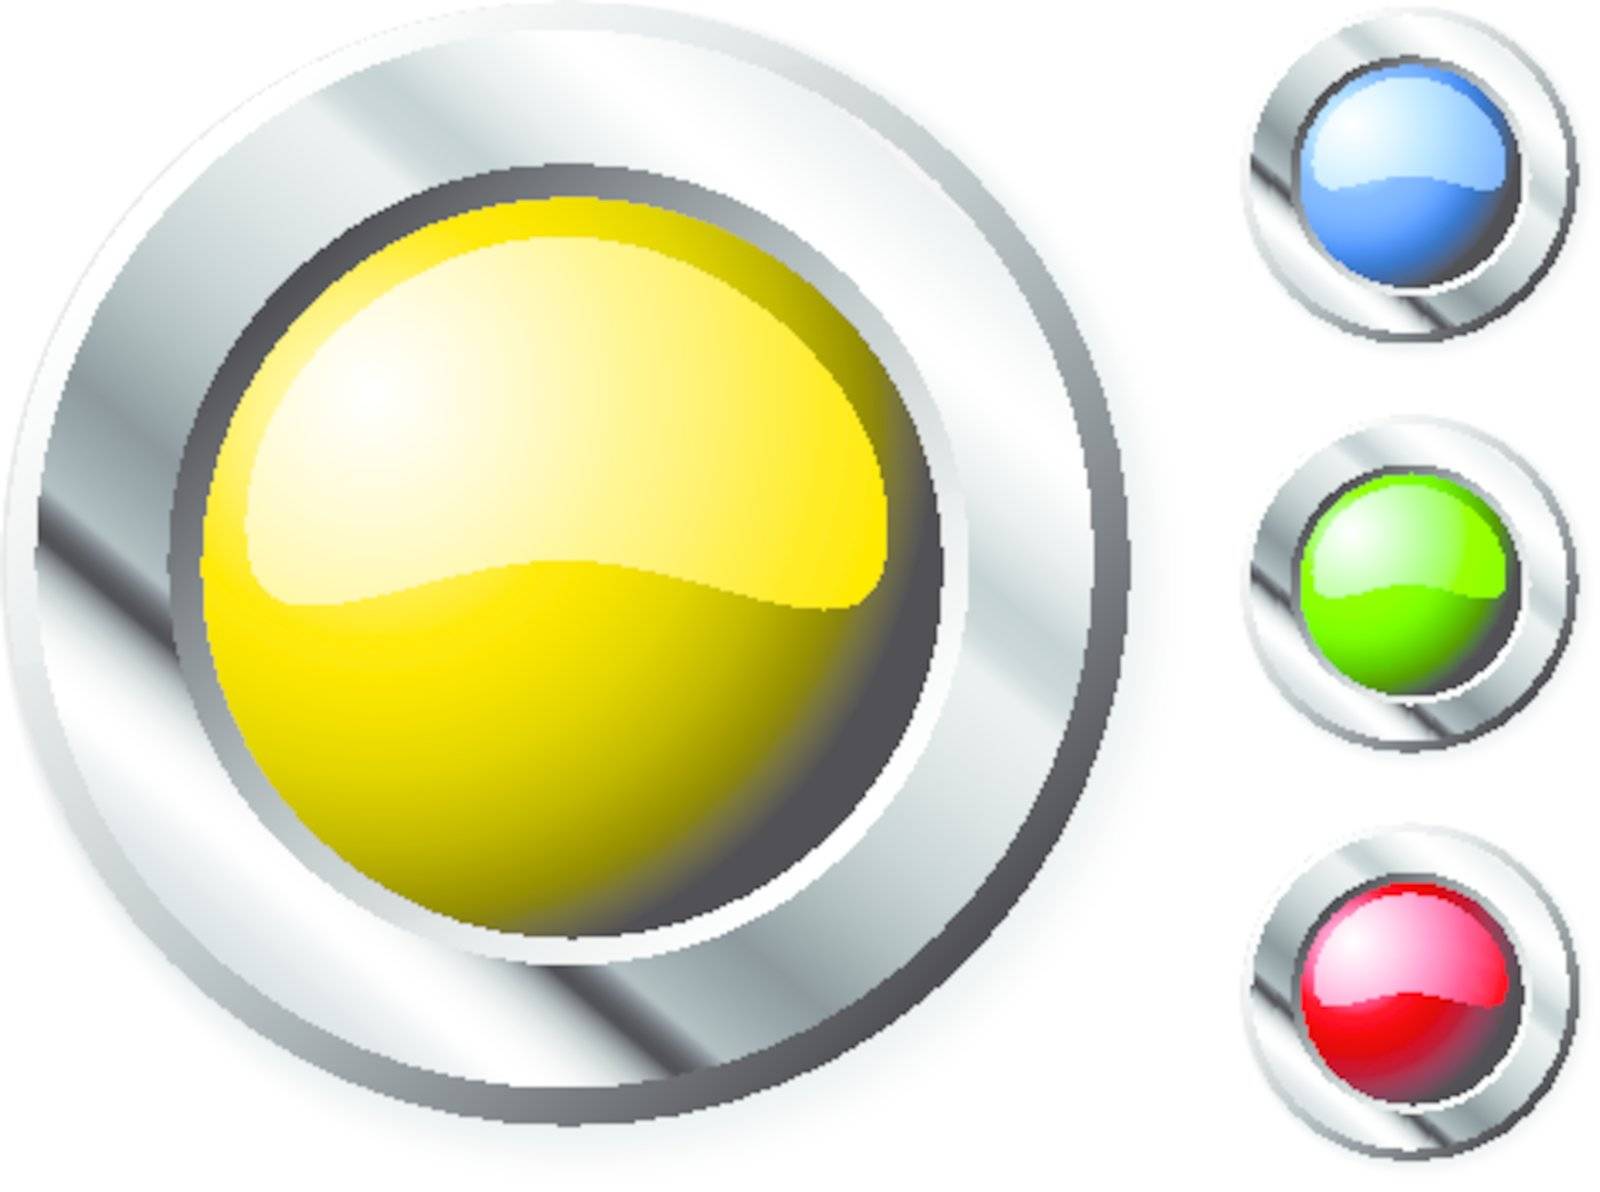 Round Colorful Buttons with chrome metal borders